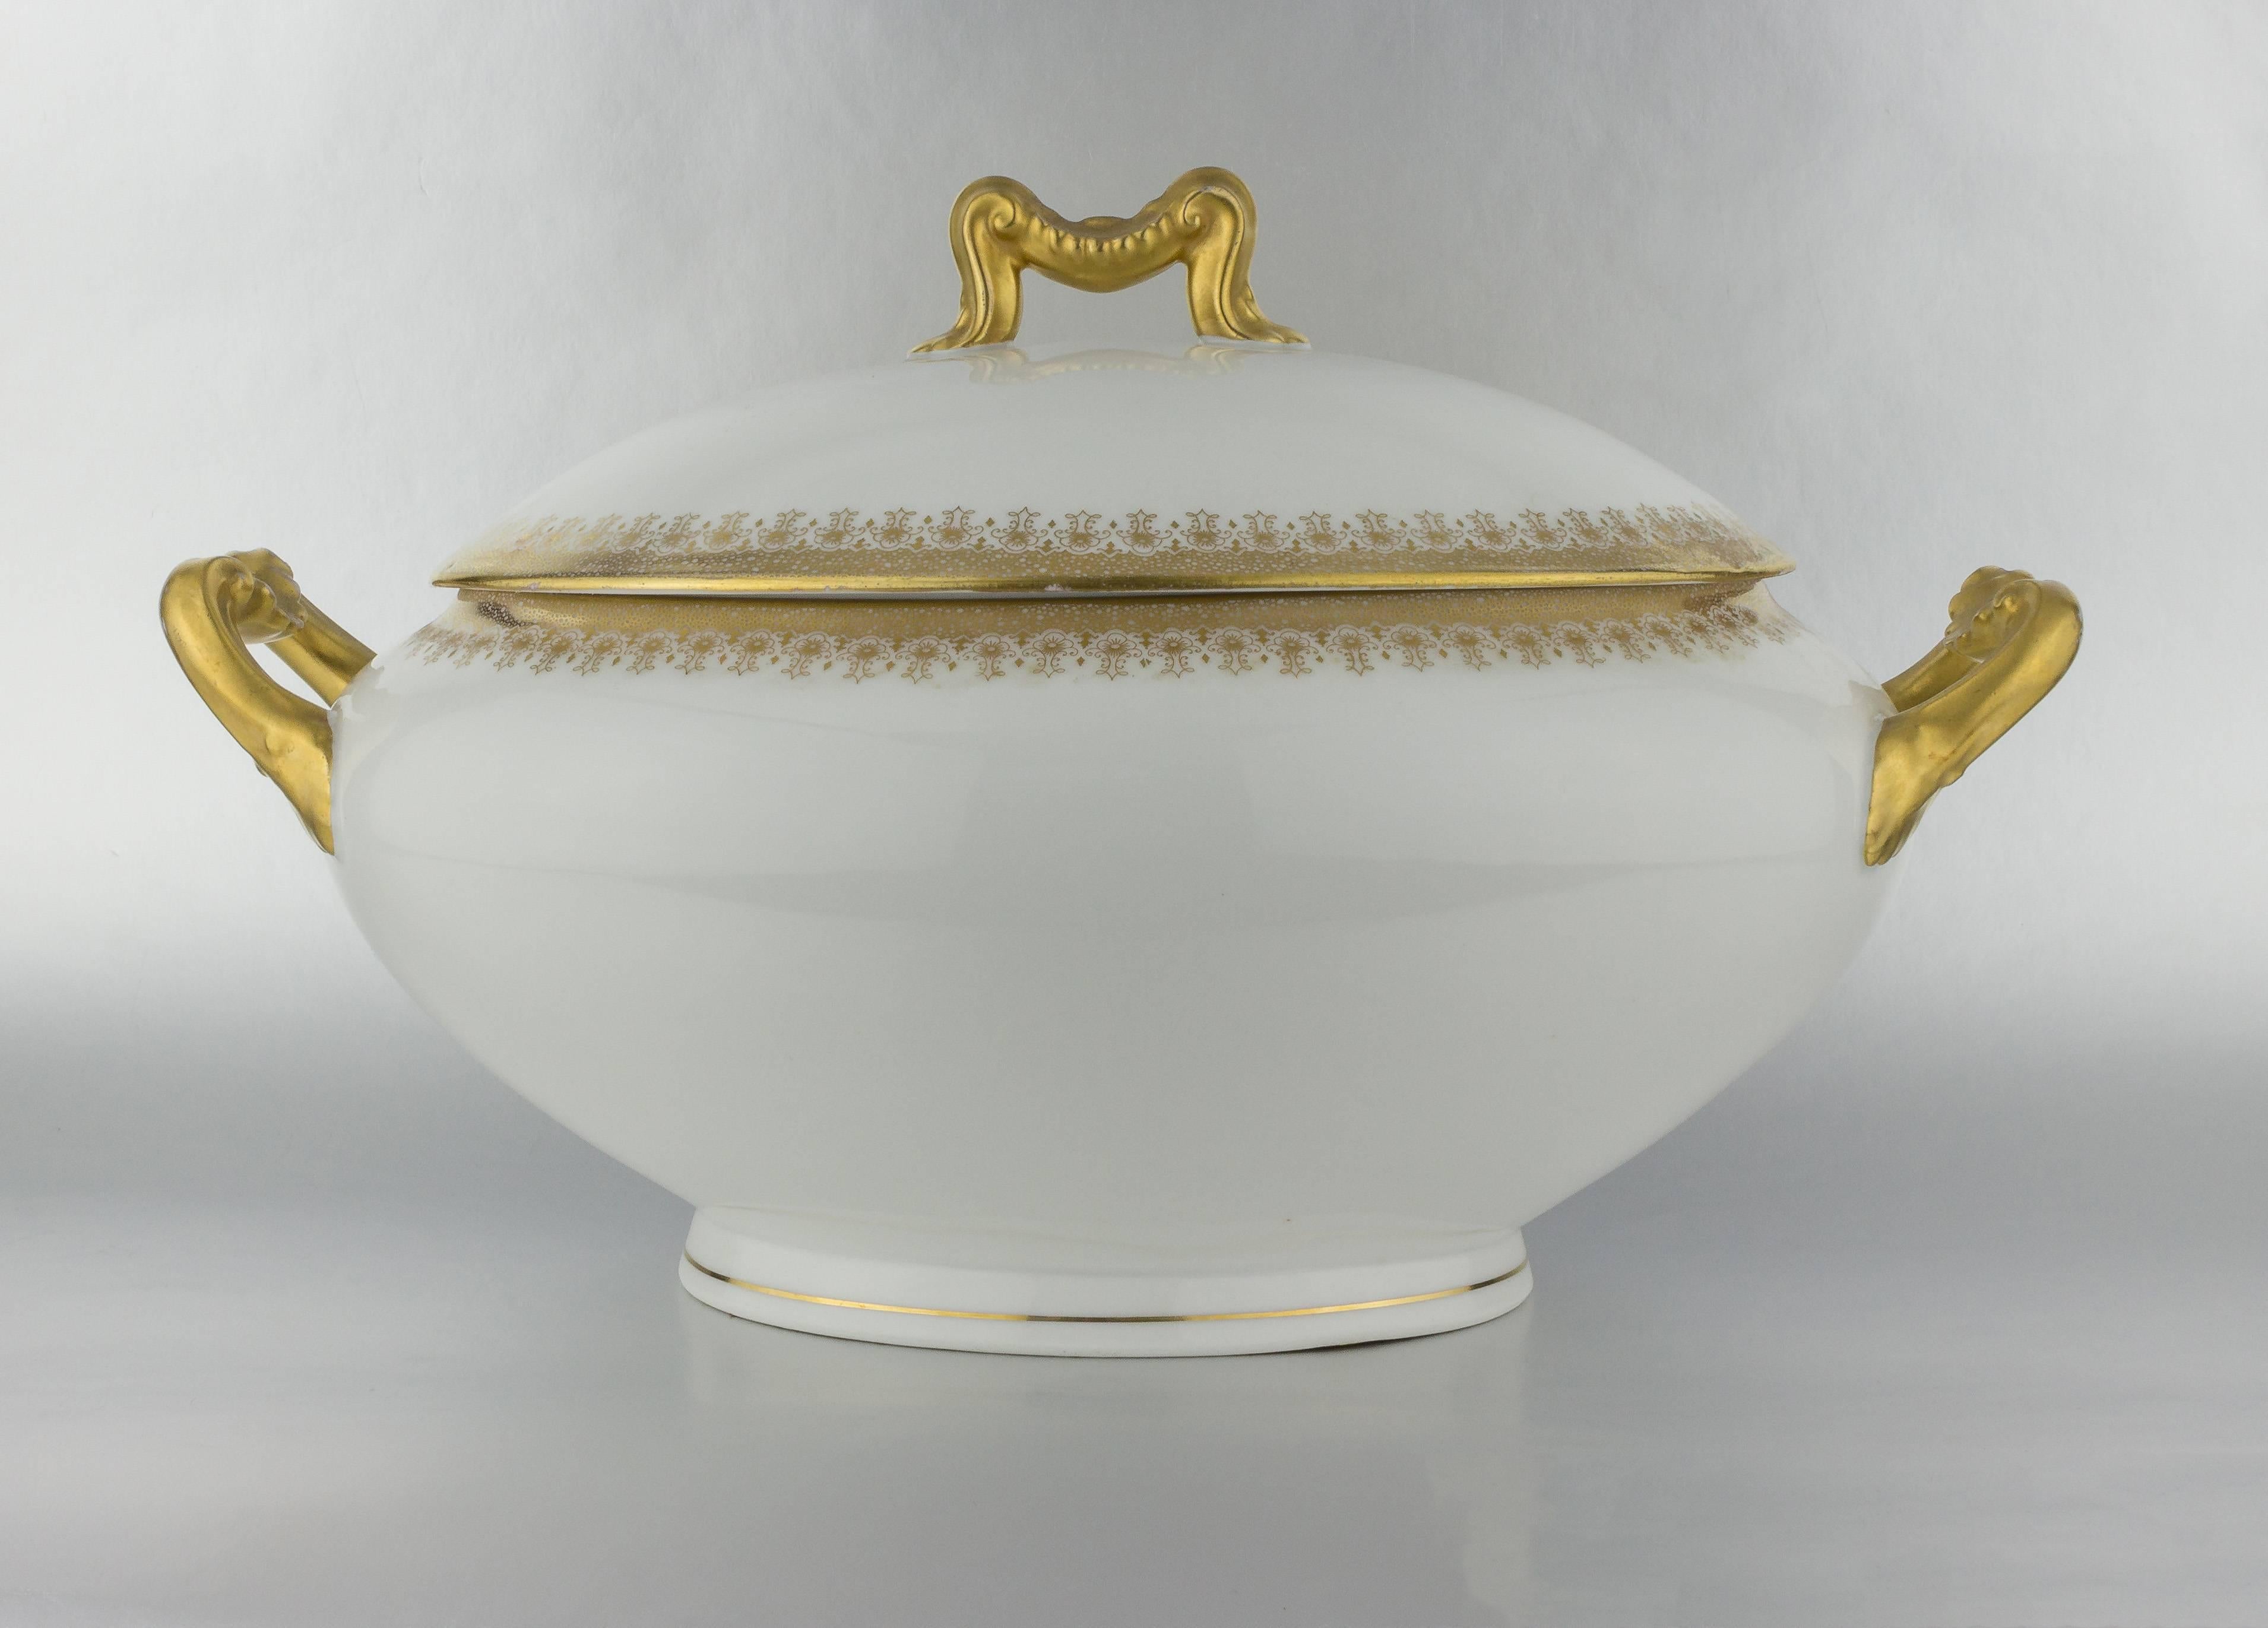 Porcelain covered tureen with gold detail and gilt handles.